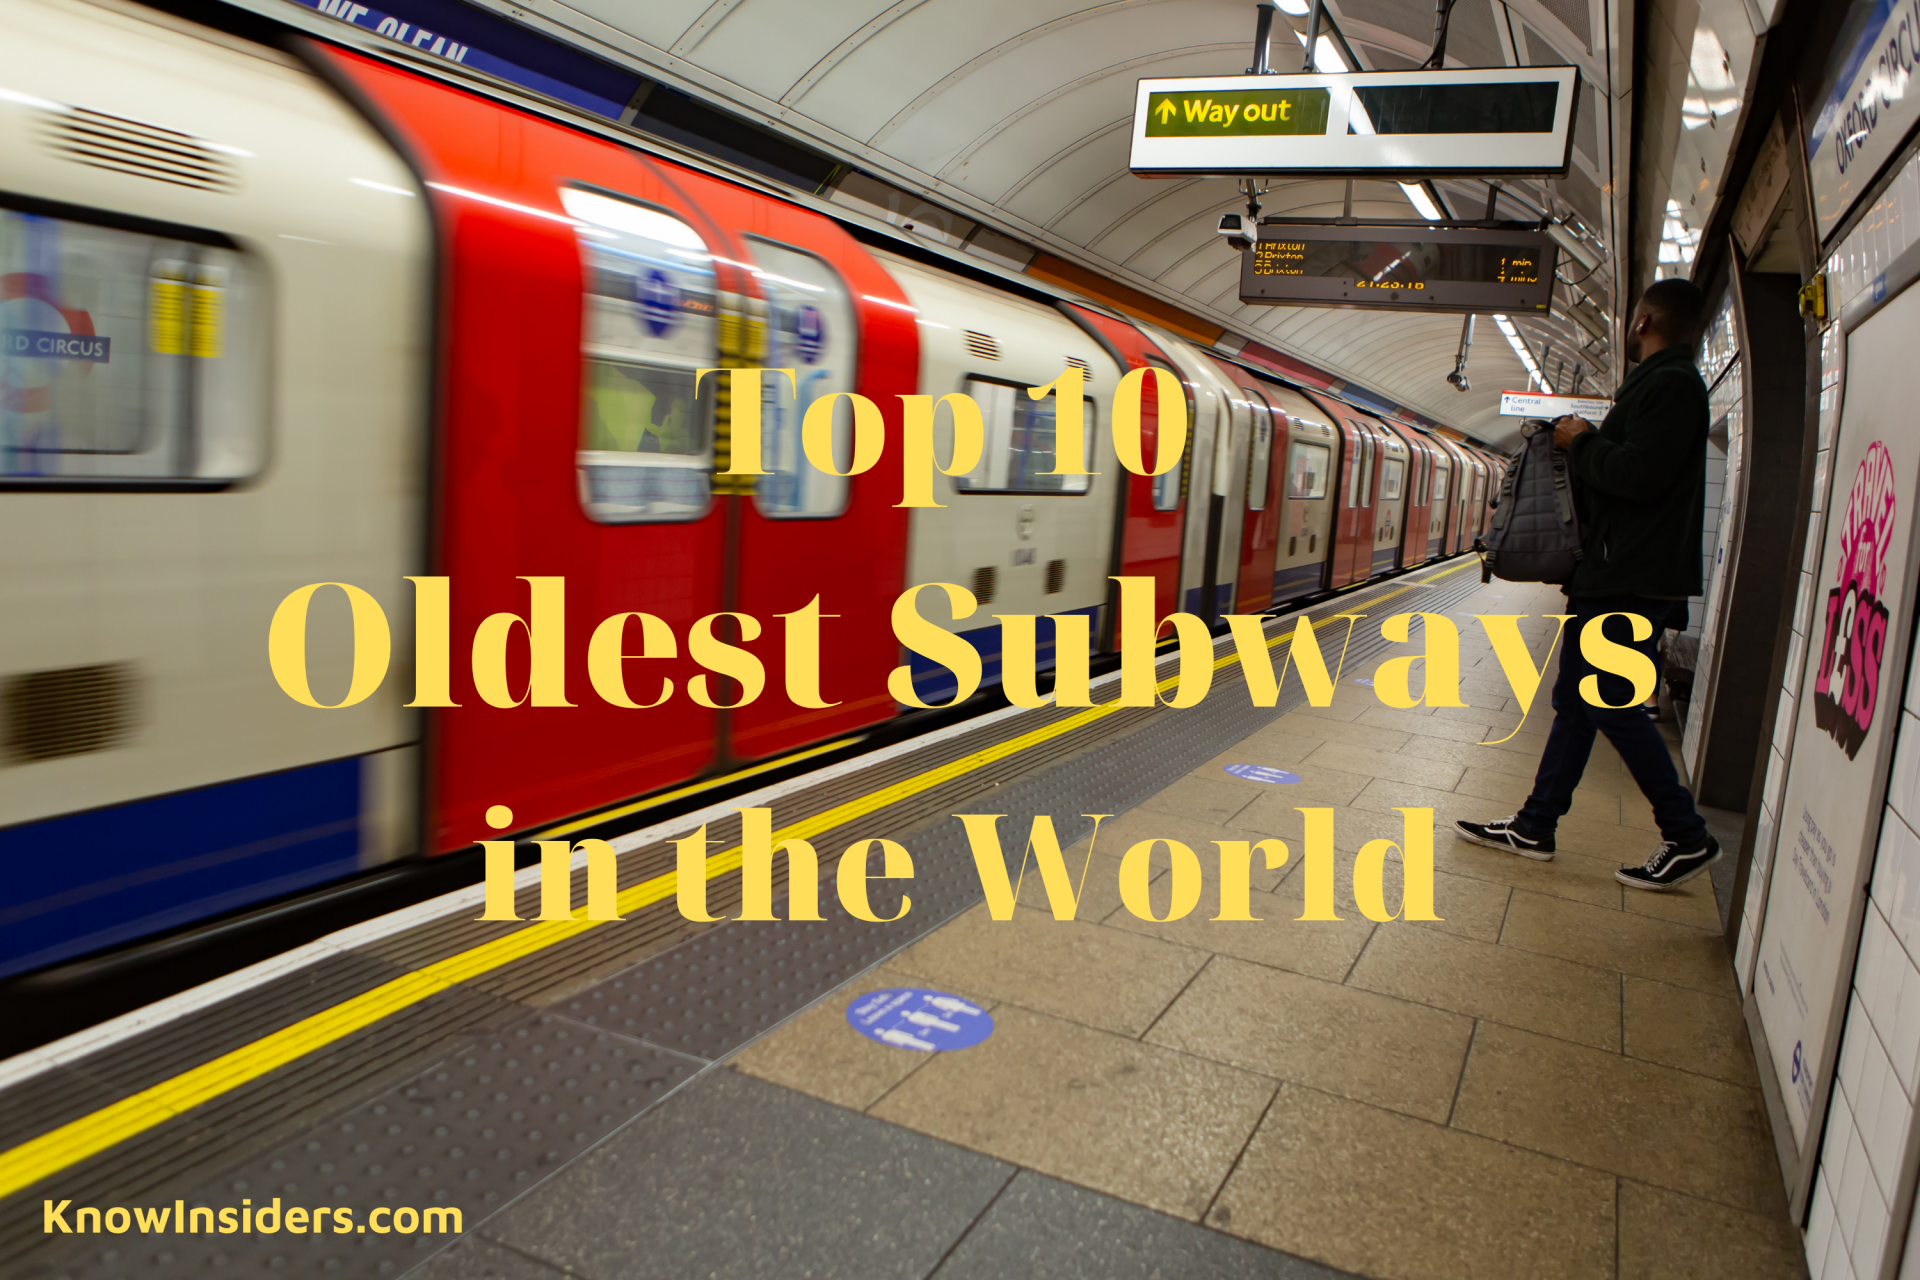 Top 10 Oldest Subways in the World